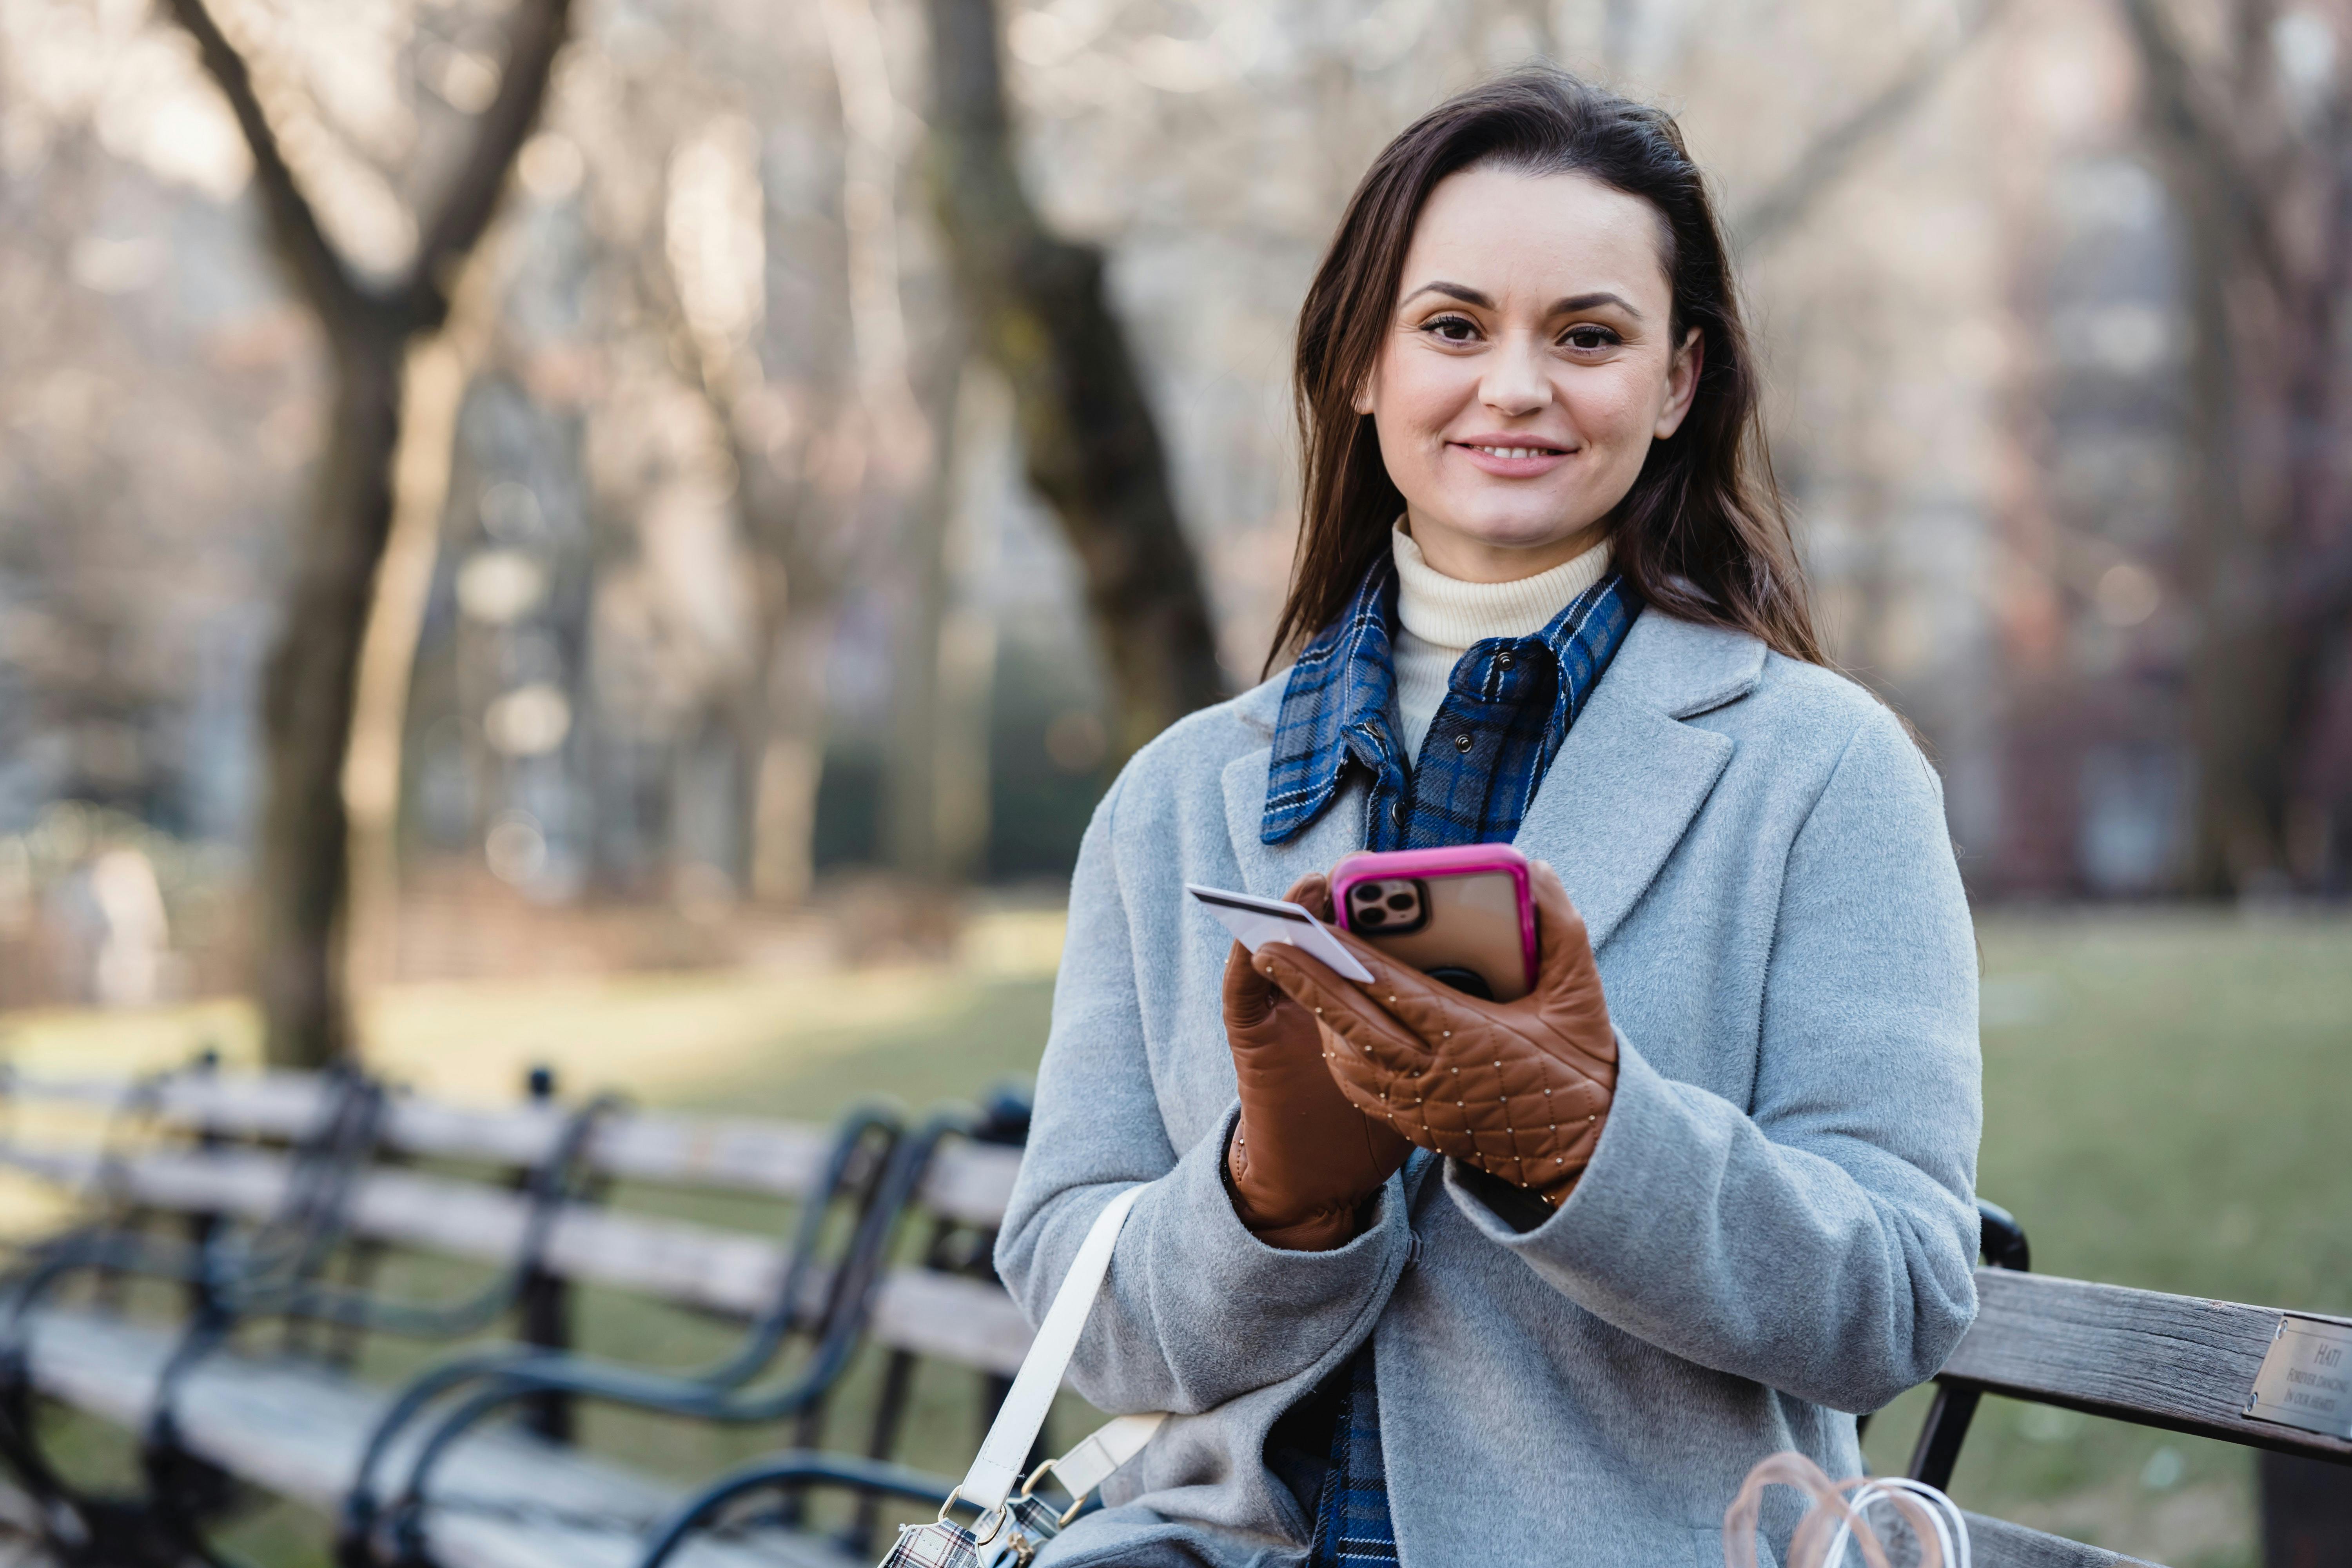 Woman in park with phone and credit card in hand